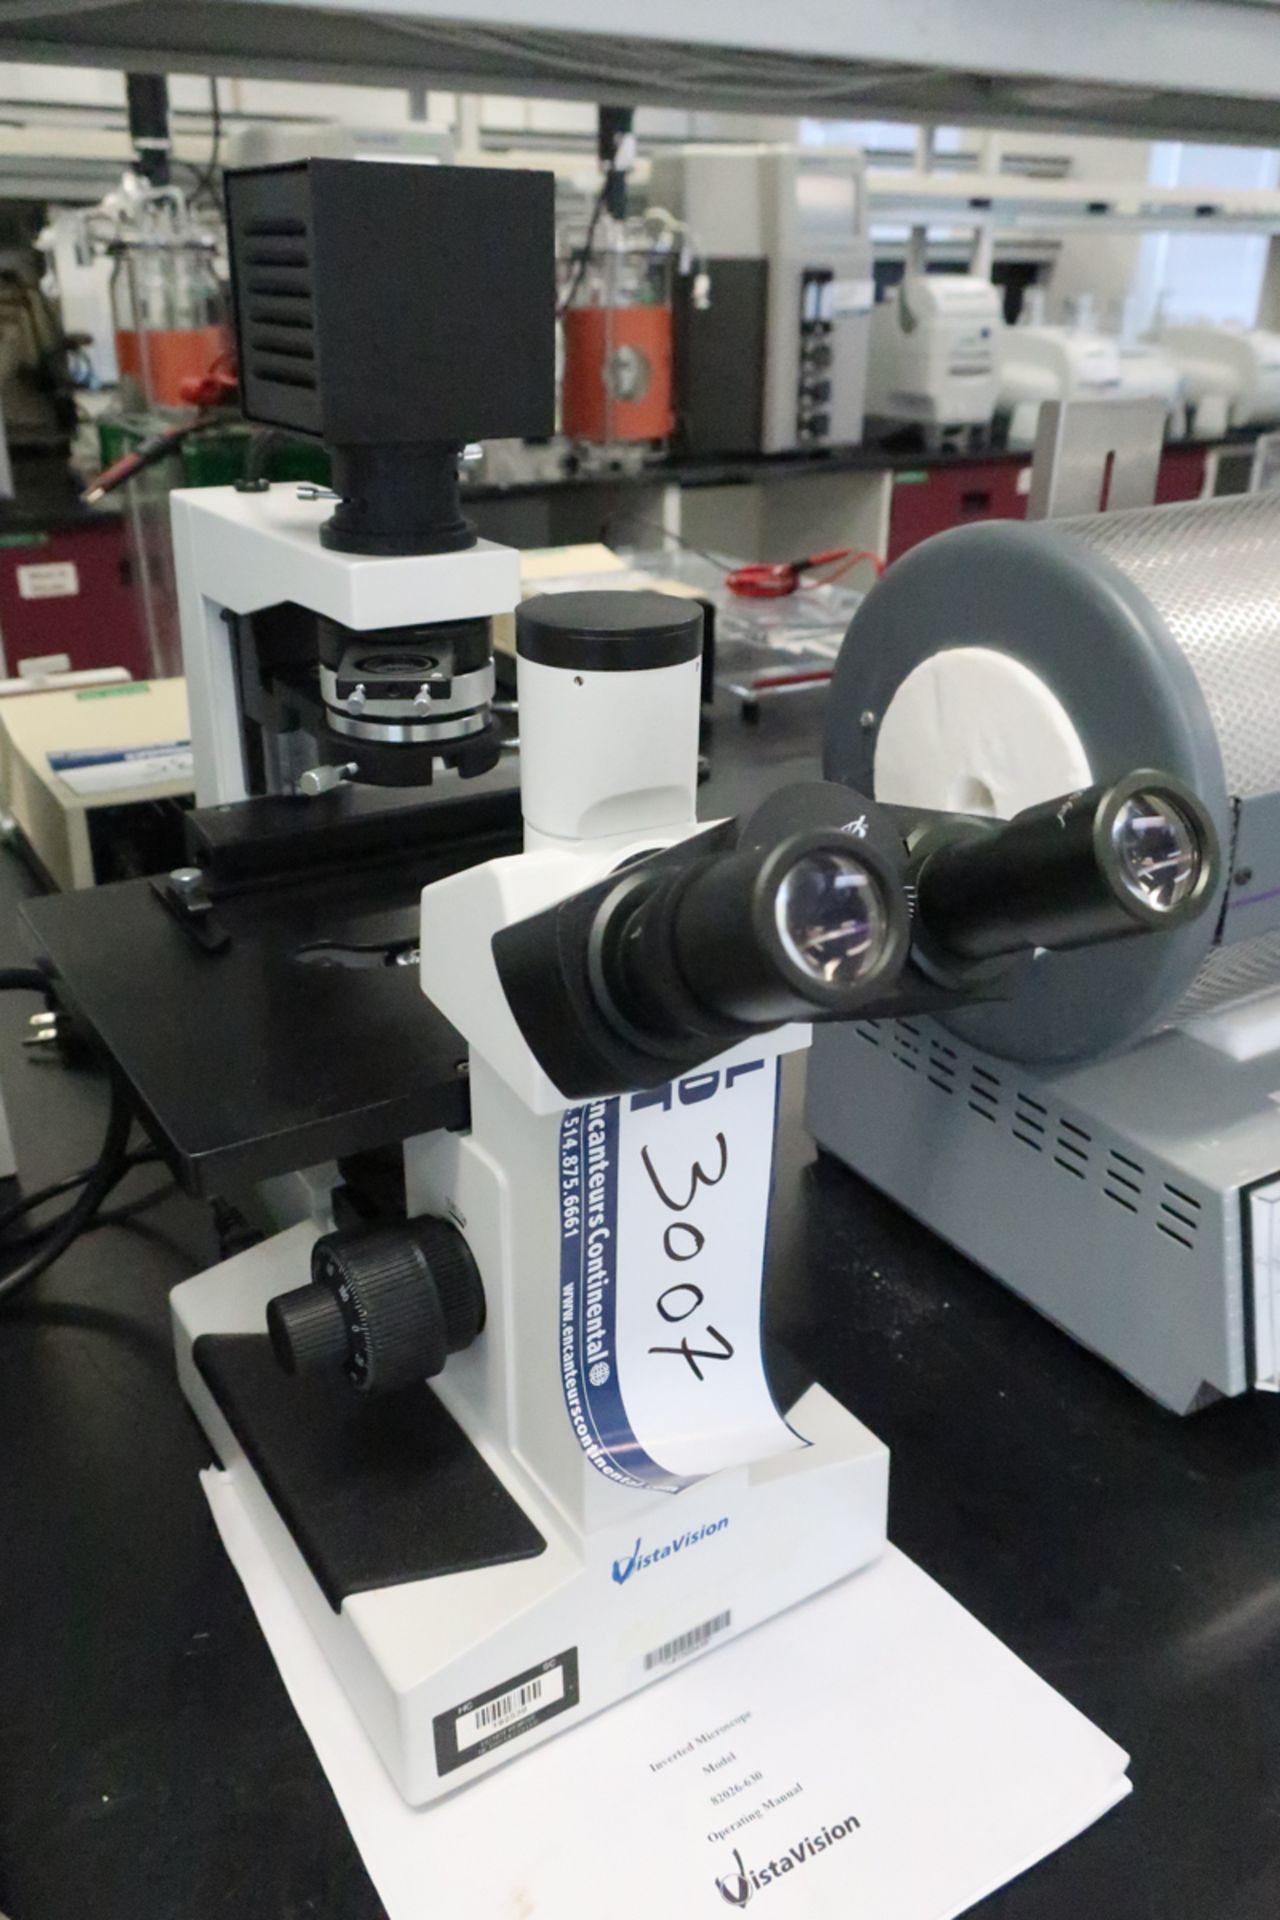 VWR VISTAVISION MICROSCOPE #82062-630 ** NOT PART OF THE BULK BID,CONDITIONAL TO CREDITOR'S APPROVAL